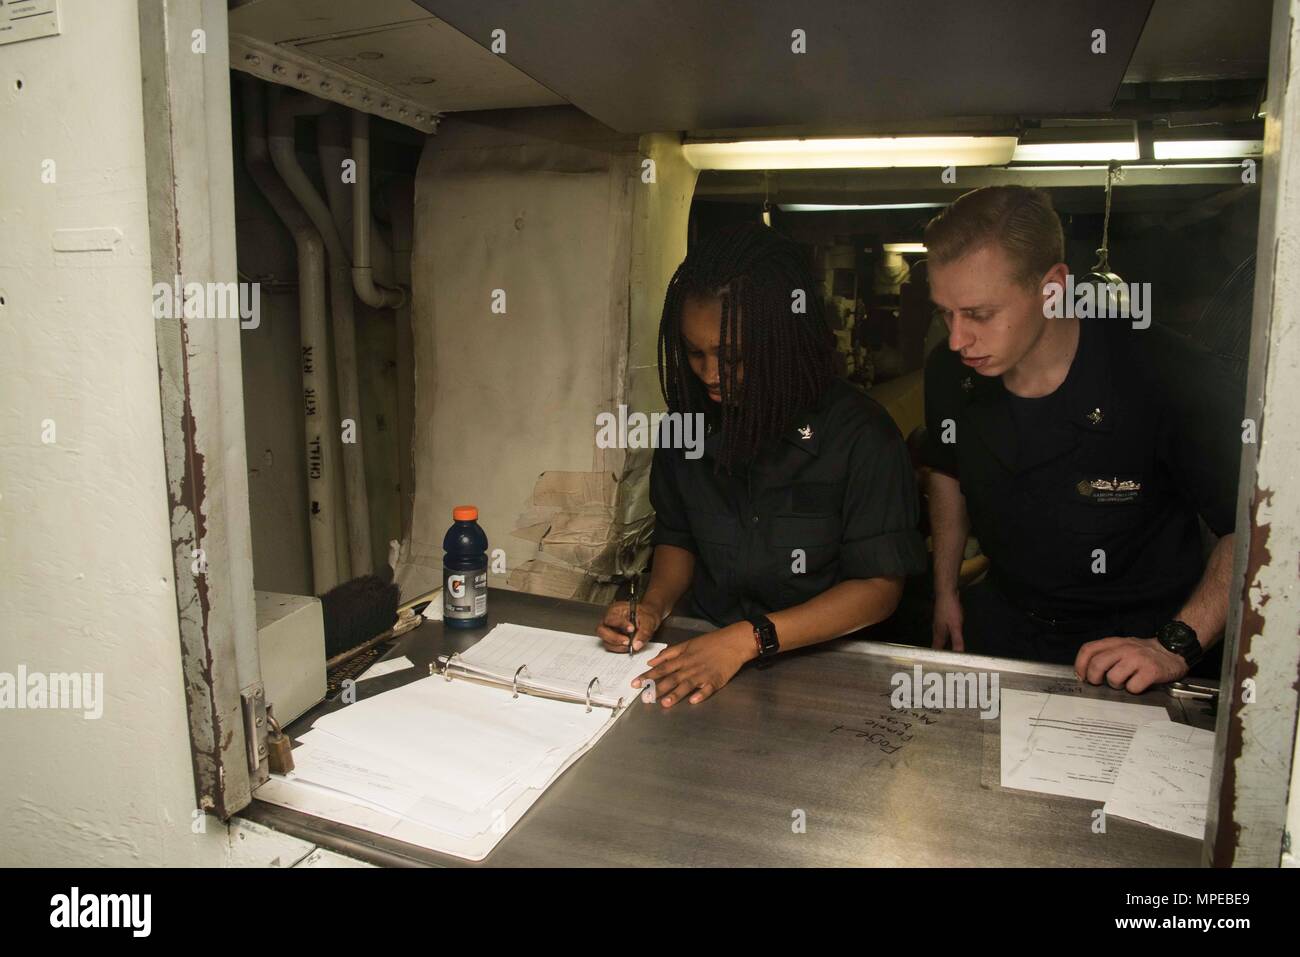 170211-N-KJ380-046  ATLANTIC OCEAN (Feb. 11, 2017) Electrician's Mate 3rd Class Precious Aducei, from Orange, N.J., and Machinist's Mate 3rd Class Damion Switzer, from San Diego, check in laundry bags in the bulk laundry room of the aircraft carrier USS Dwight D. Eisenhower (CVN 69) (Ike). Ike is currently conducting aircraft carrier qualifications during the sustainment phase of the Optimized Fleet Response Plan (OFRP). (U.S. Navy photo by Mass Communication Specialist Seaman Neo Greene III) Stock Photo